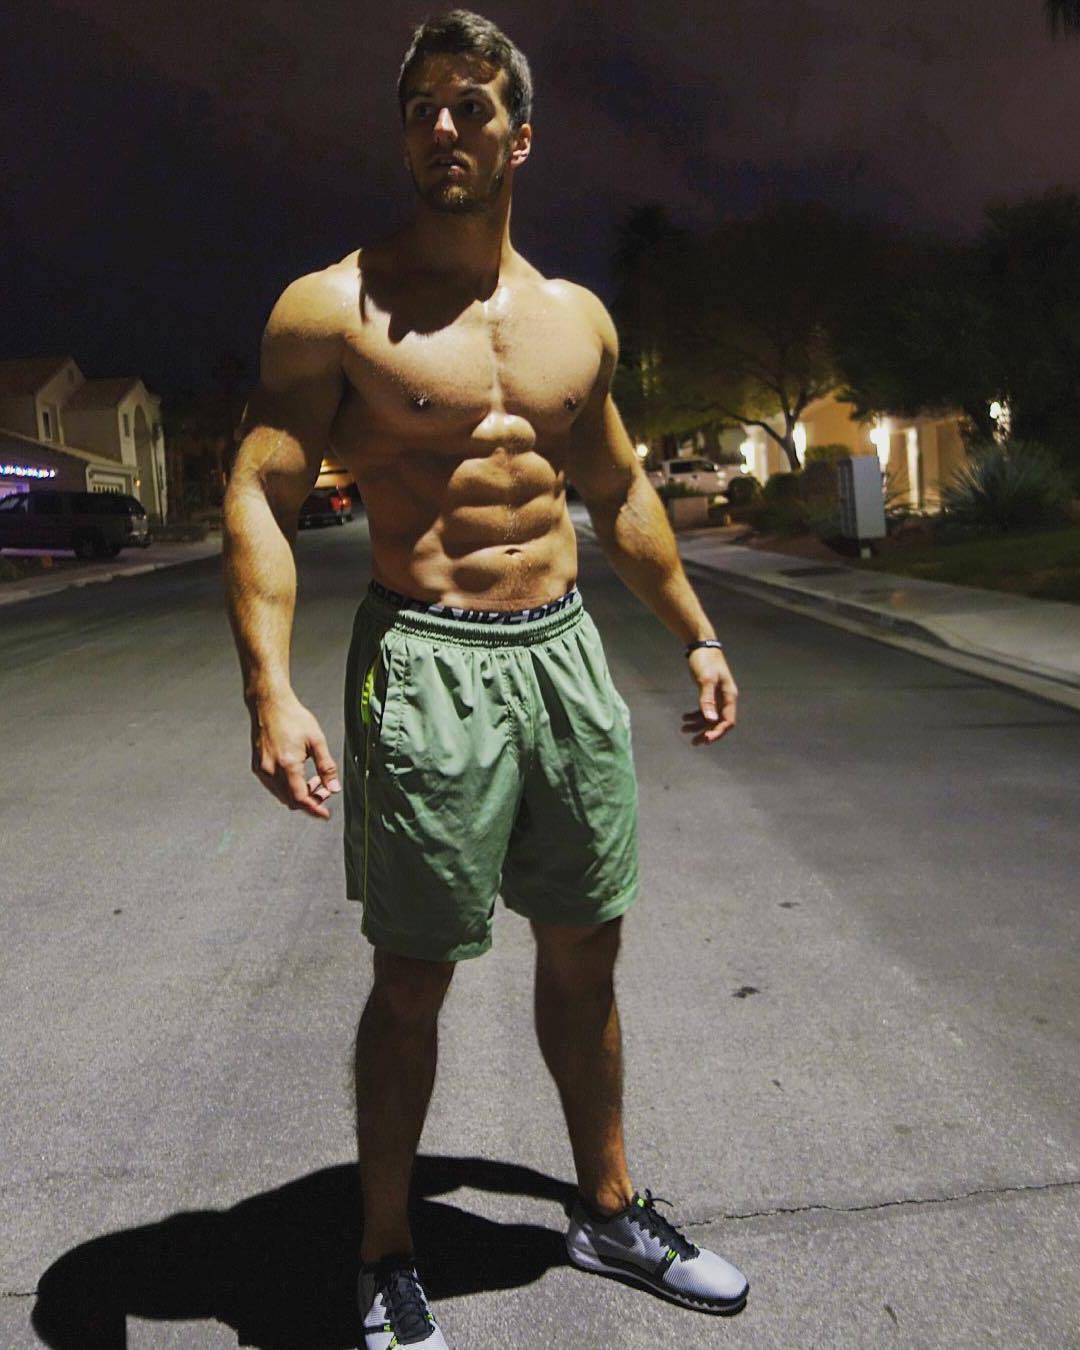 shirtless-fit-muscular-neighbor-masculine-young-hunk-abs-night-street